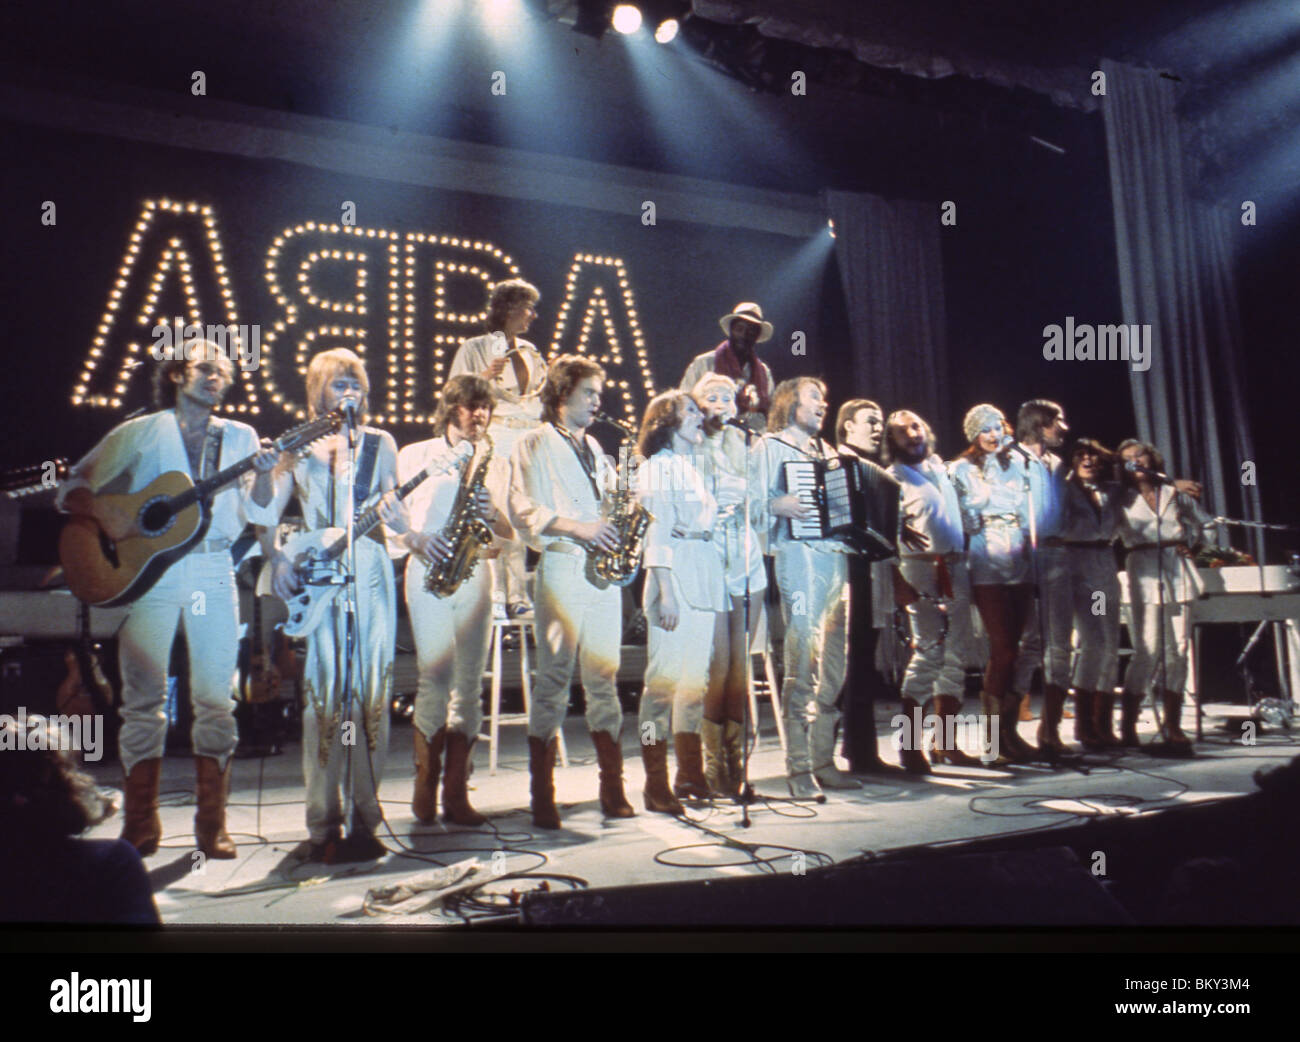 ABBA - Swedish pop group with guests at finale of a stage show about 1978 Stock Photo